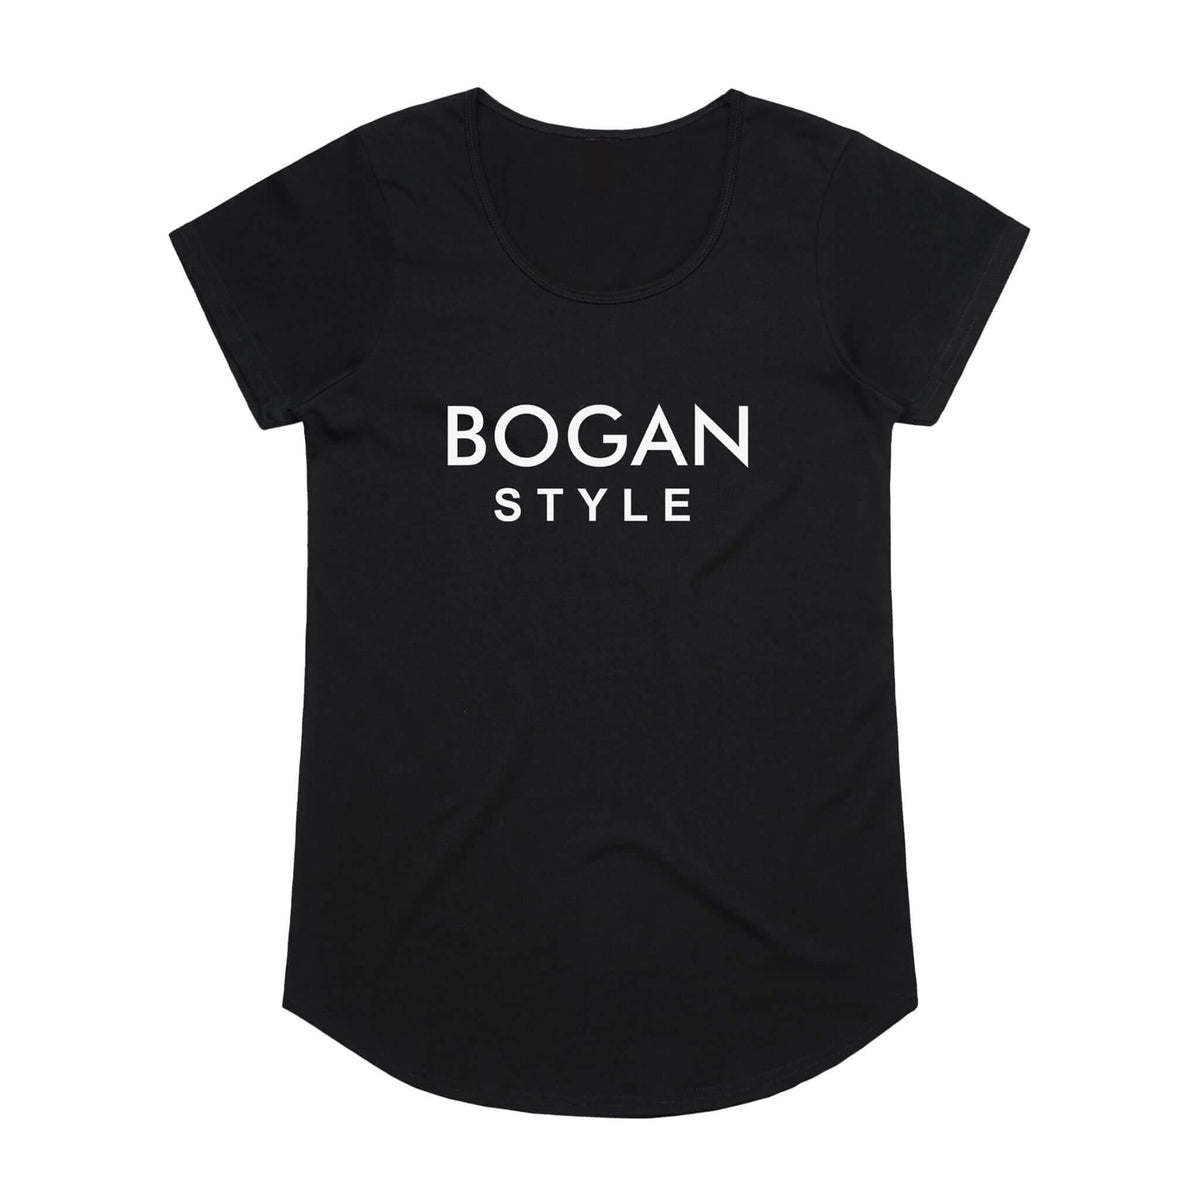 Black womens t shirt with Bogan Style in white letters on the front.